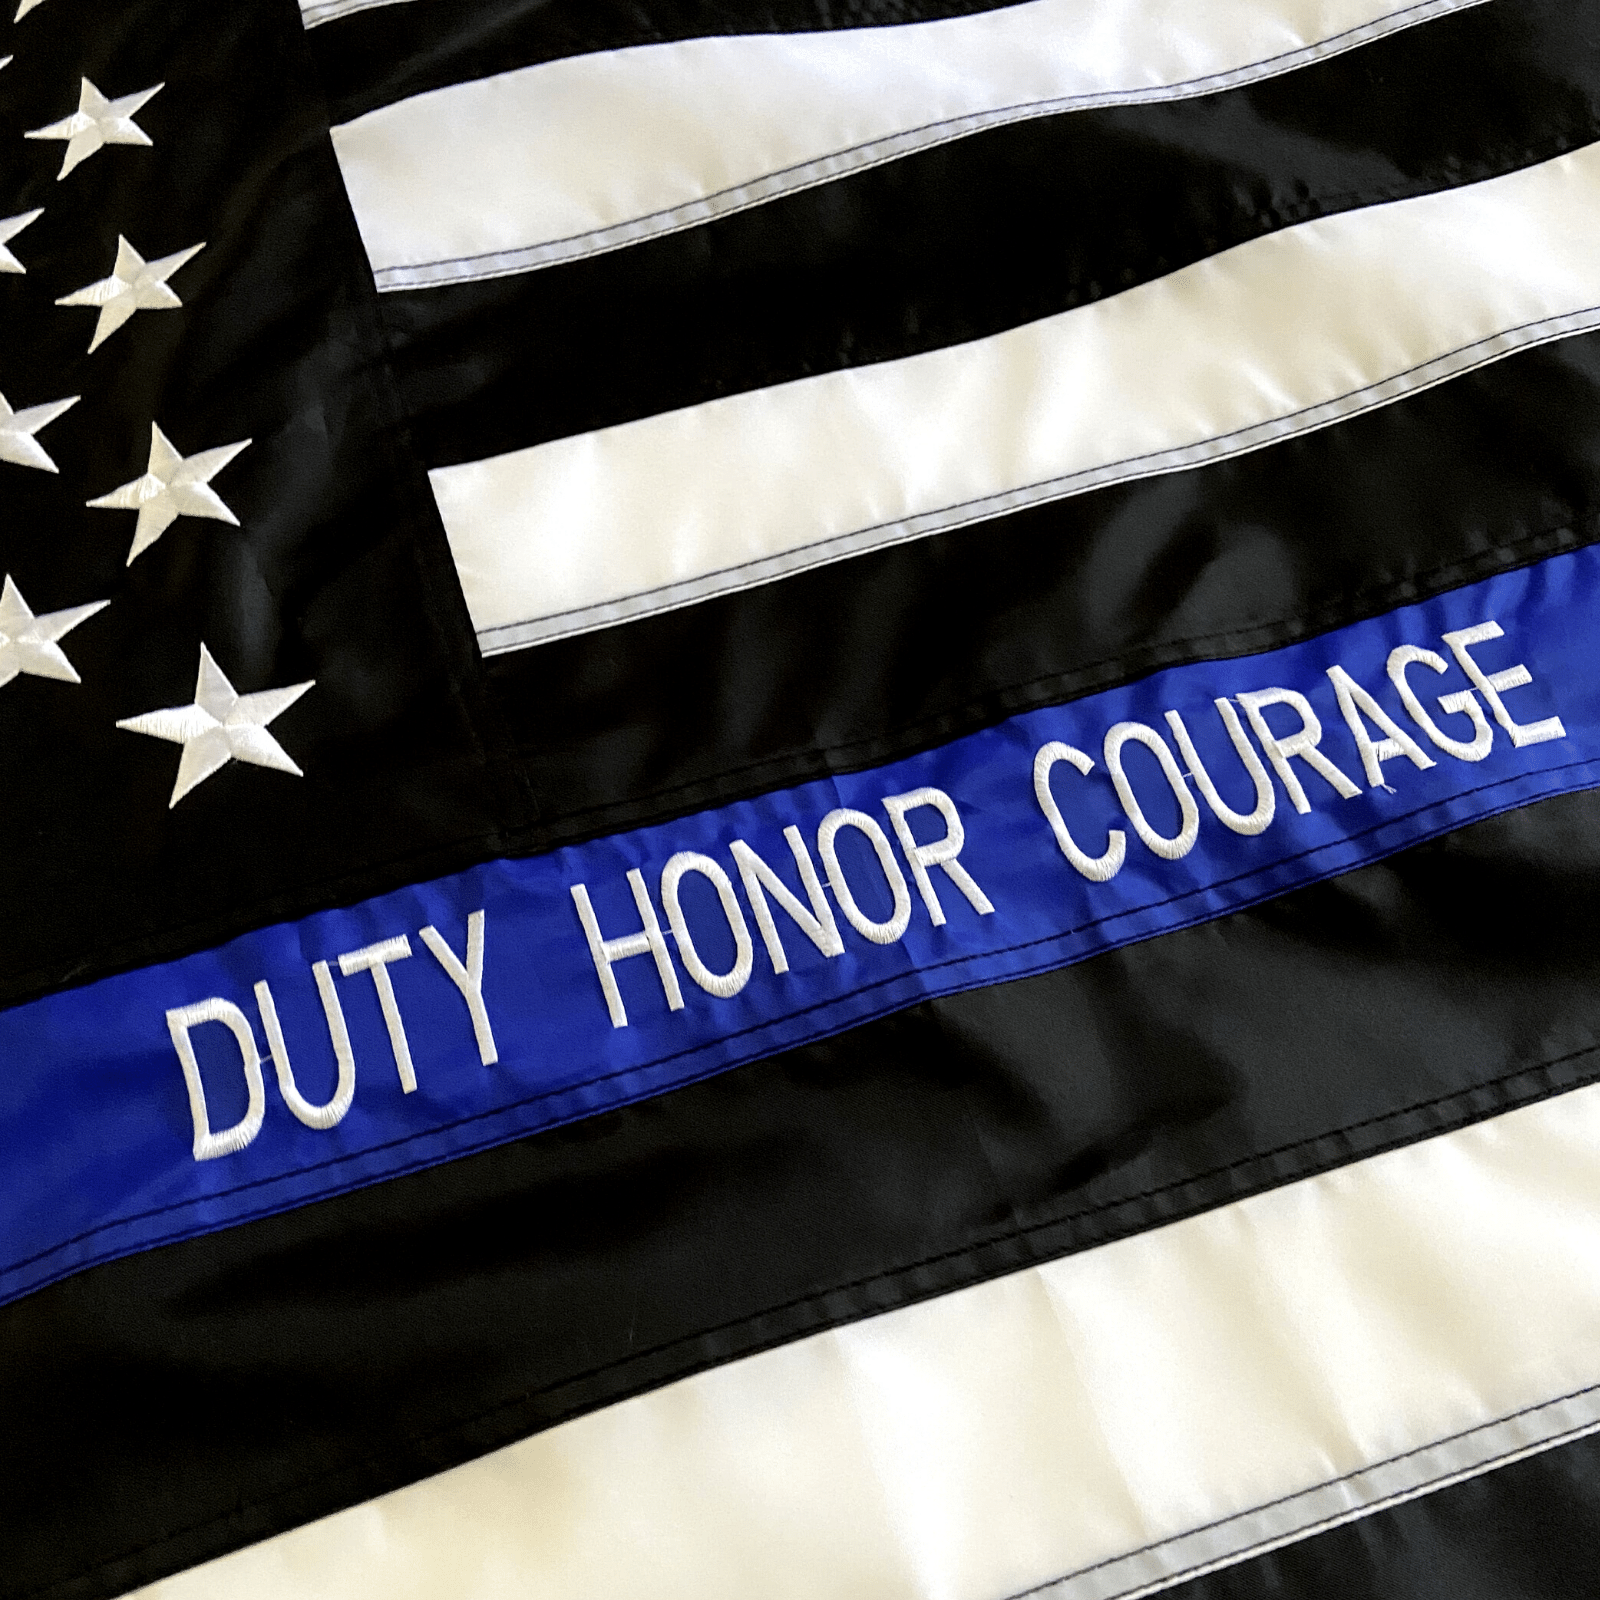 thin blue Line Flag with custom embroidered text Duty Honor Courage